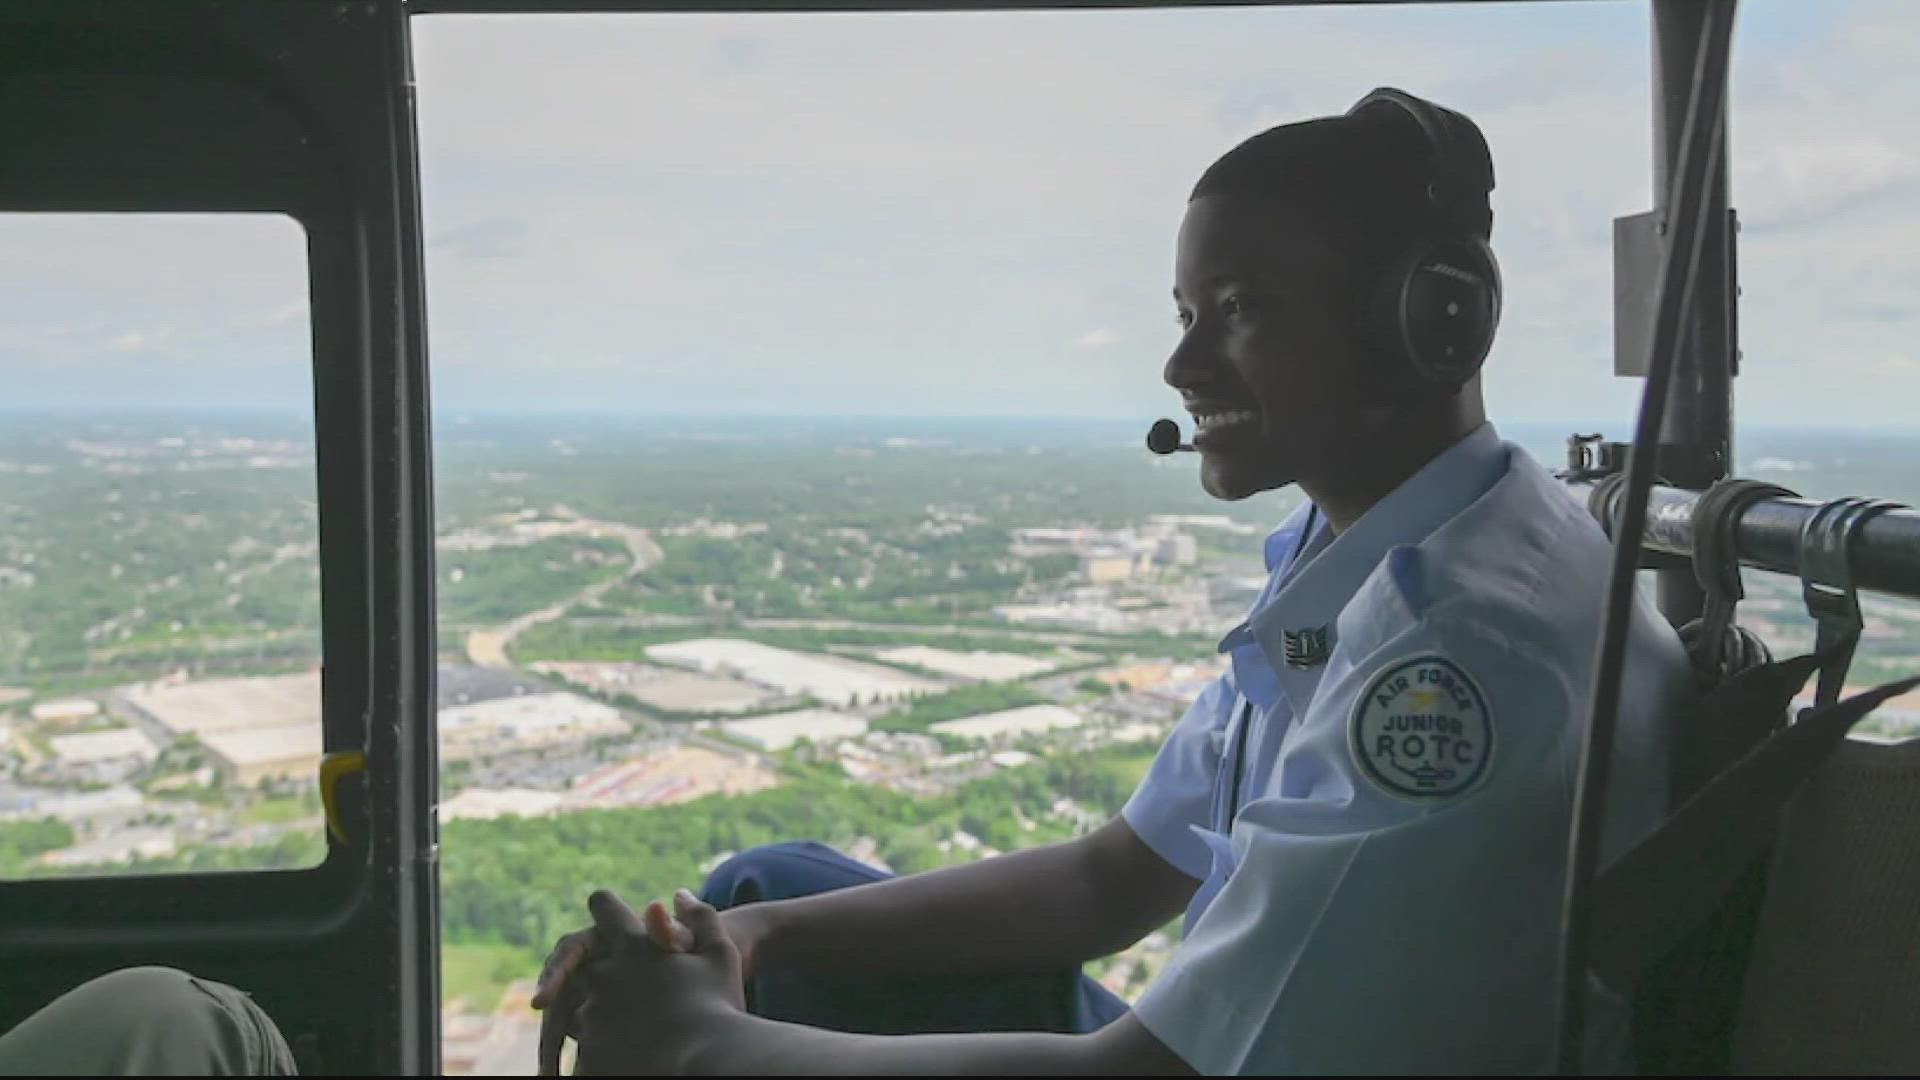 Caleb Smith had the opportunity to see D.C. monuments from a unique perspective in the air. A fellow pilot gifted Caleb with a special glider.